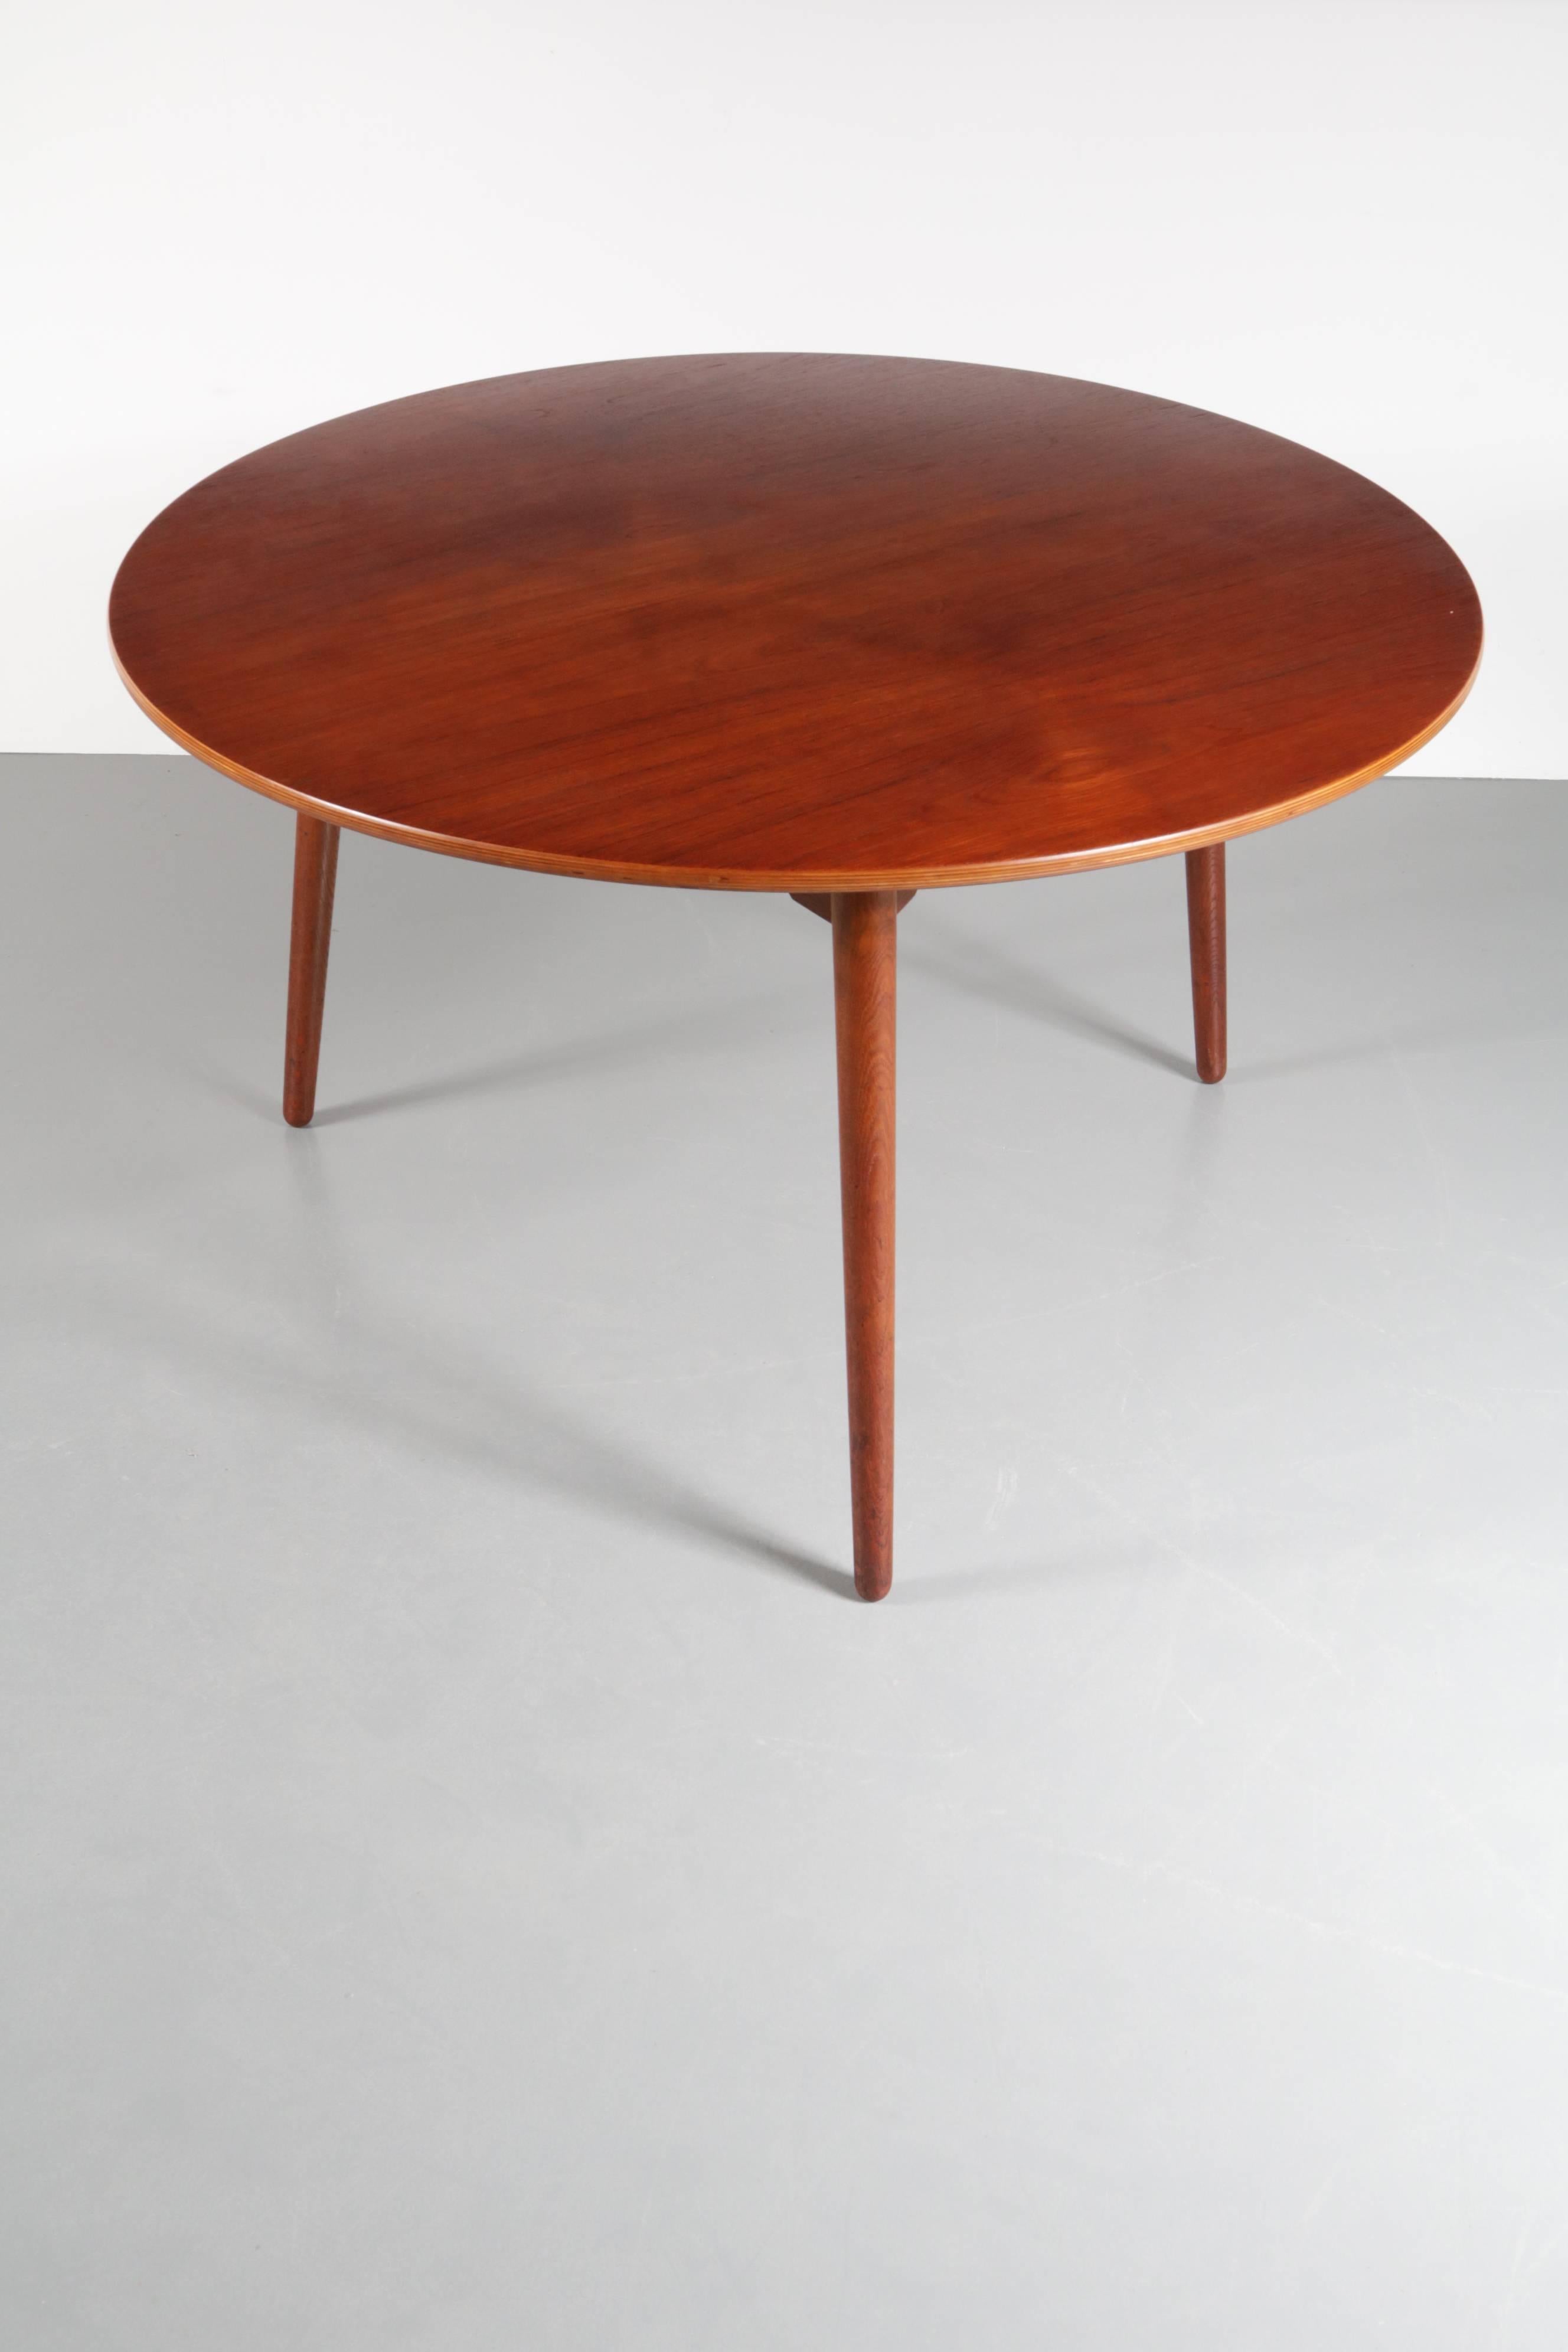 Beautiful round dining table model FH4602, designed by Hans J. Wegner, manufactured by Fritz Hansen in Denmark, circa 1950.

This eye-catching piece is famous for it's smart design with tripod legs, making it easier to sit around with more people.